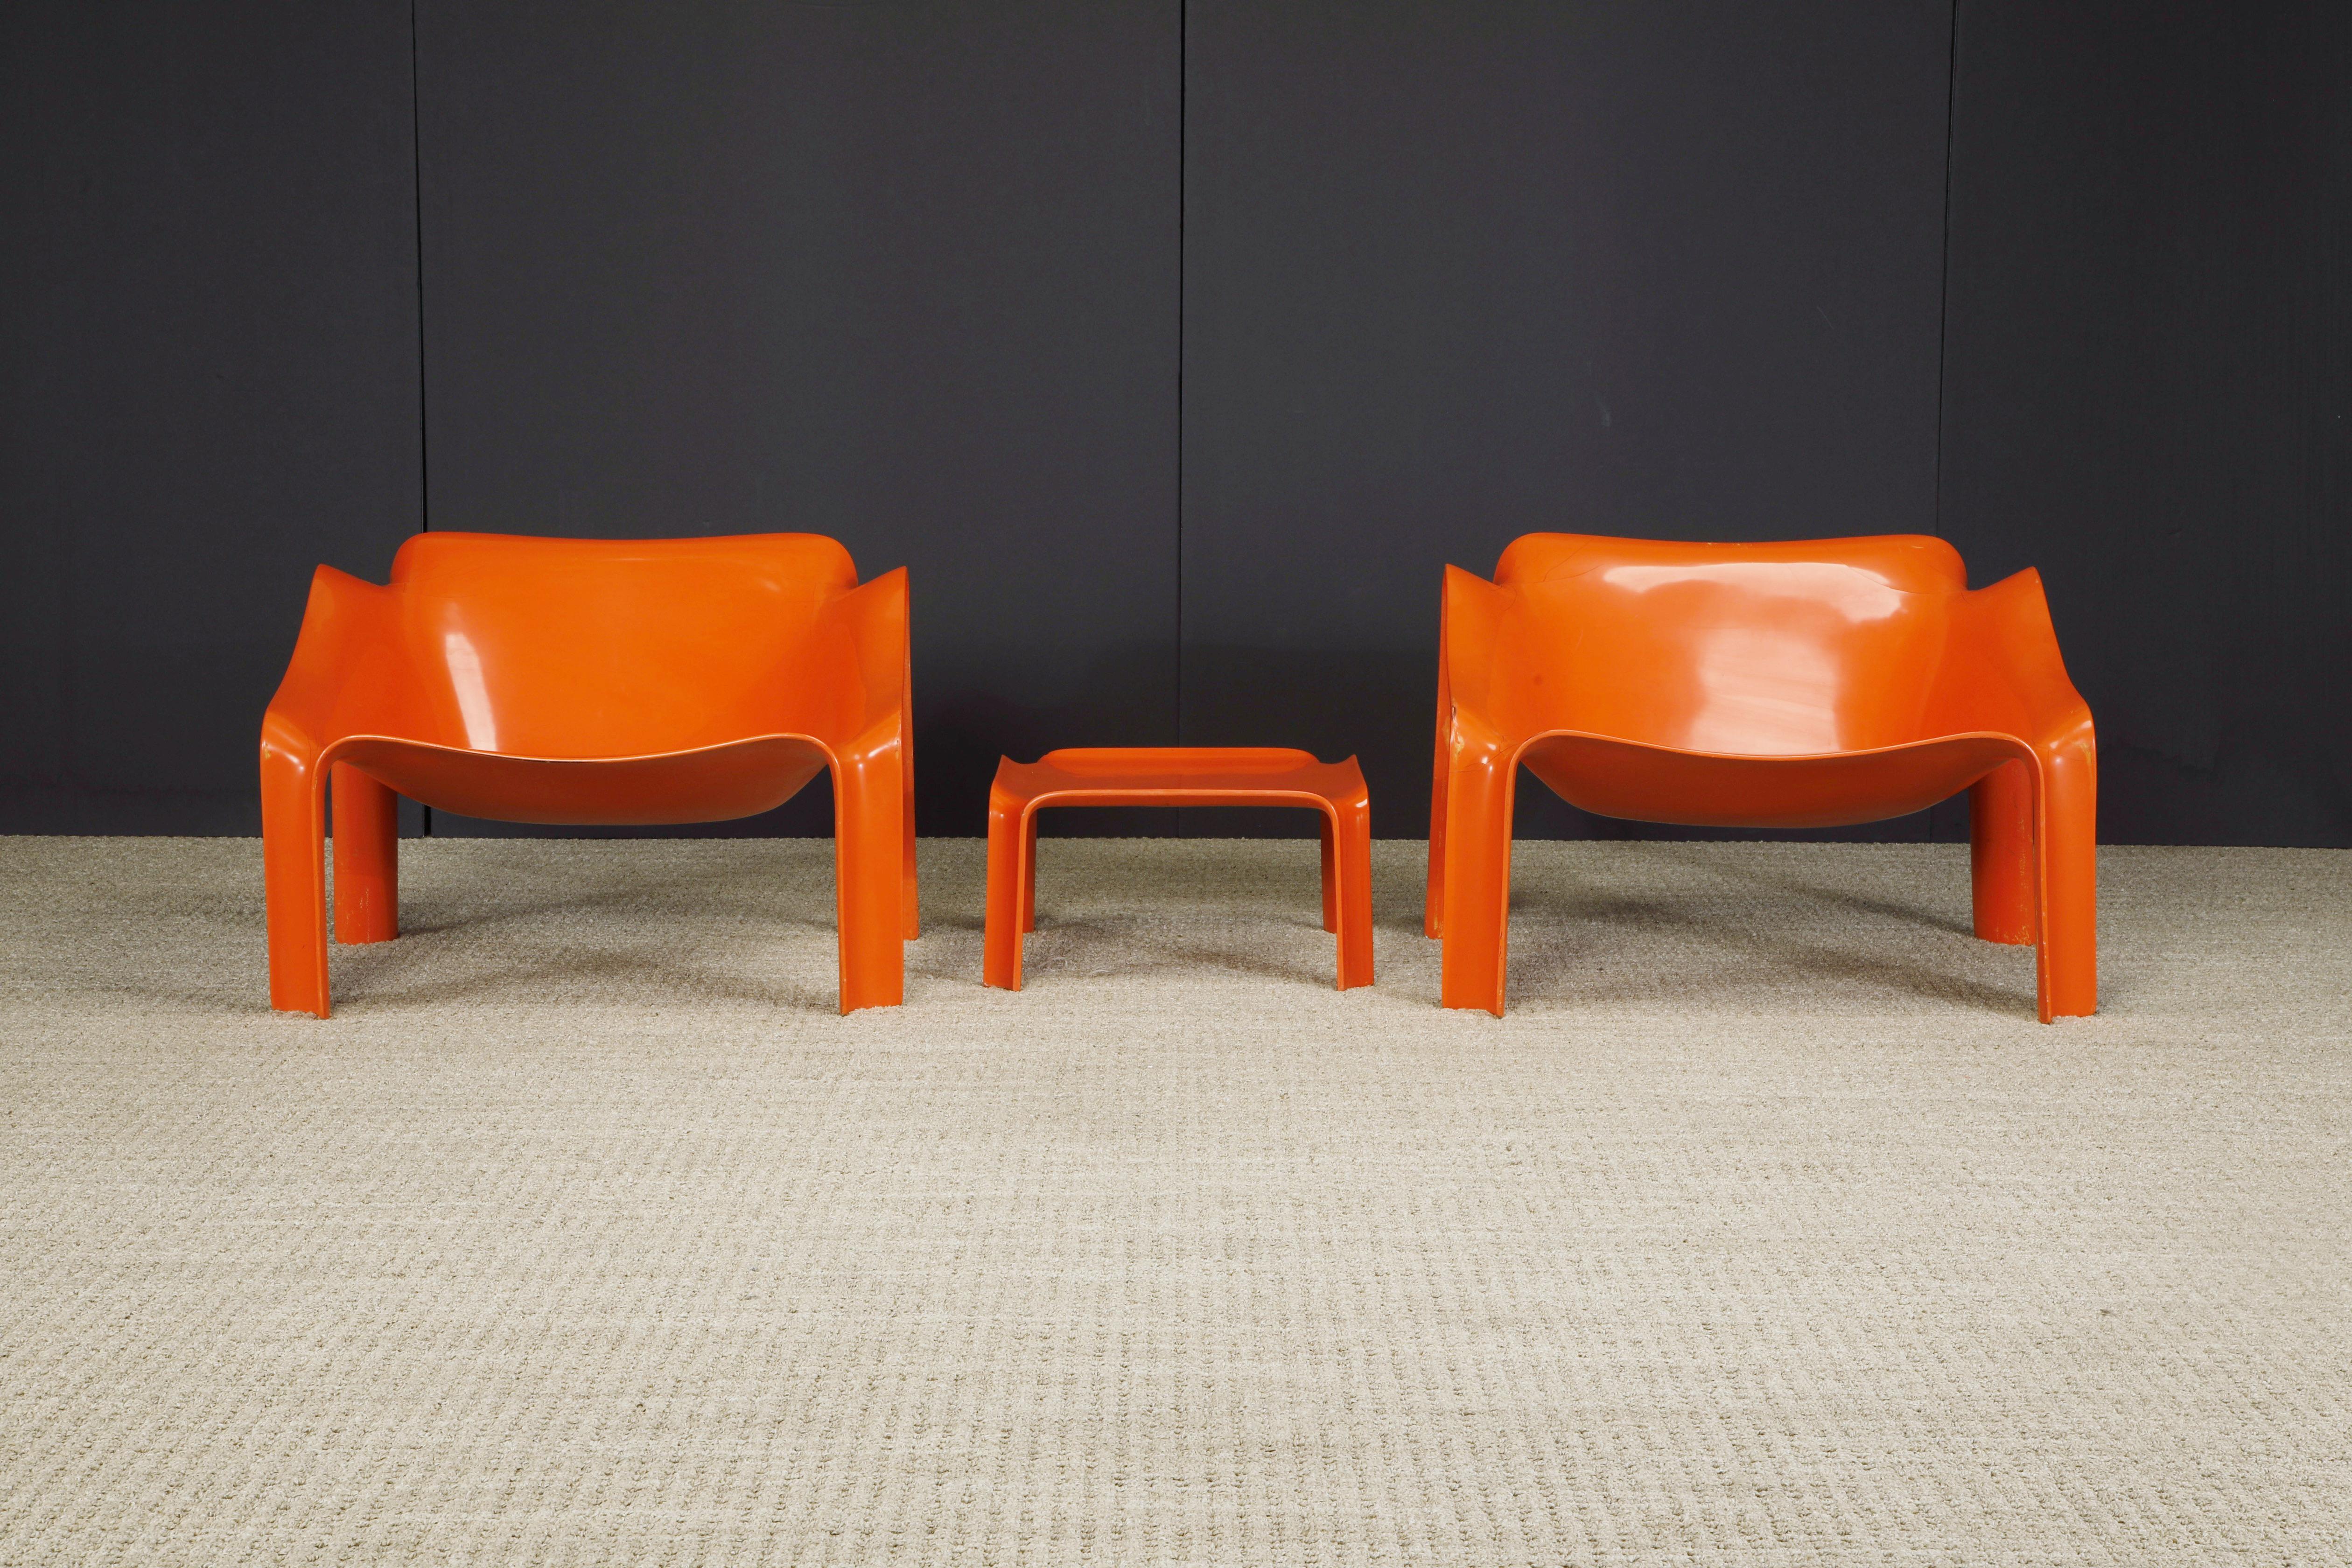 This groovy set of Model 'F303' lounge chairs (2) and side table (1) by Pierre Paulin for Artifort was designed in the 1970s and still an icon of 70s modern design to this day. This set was procured by Jim Walrod for The Standard Hotel in Downtown